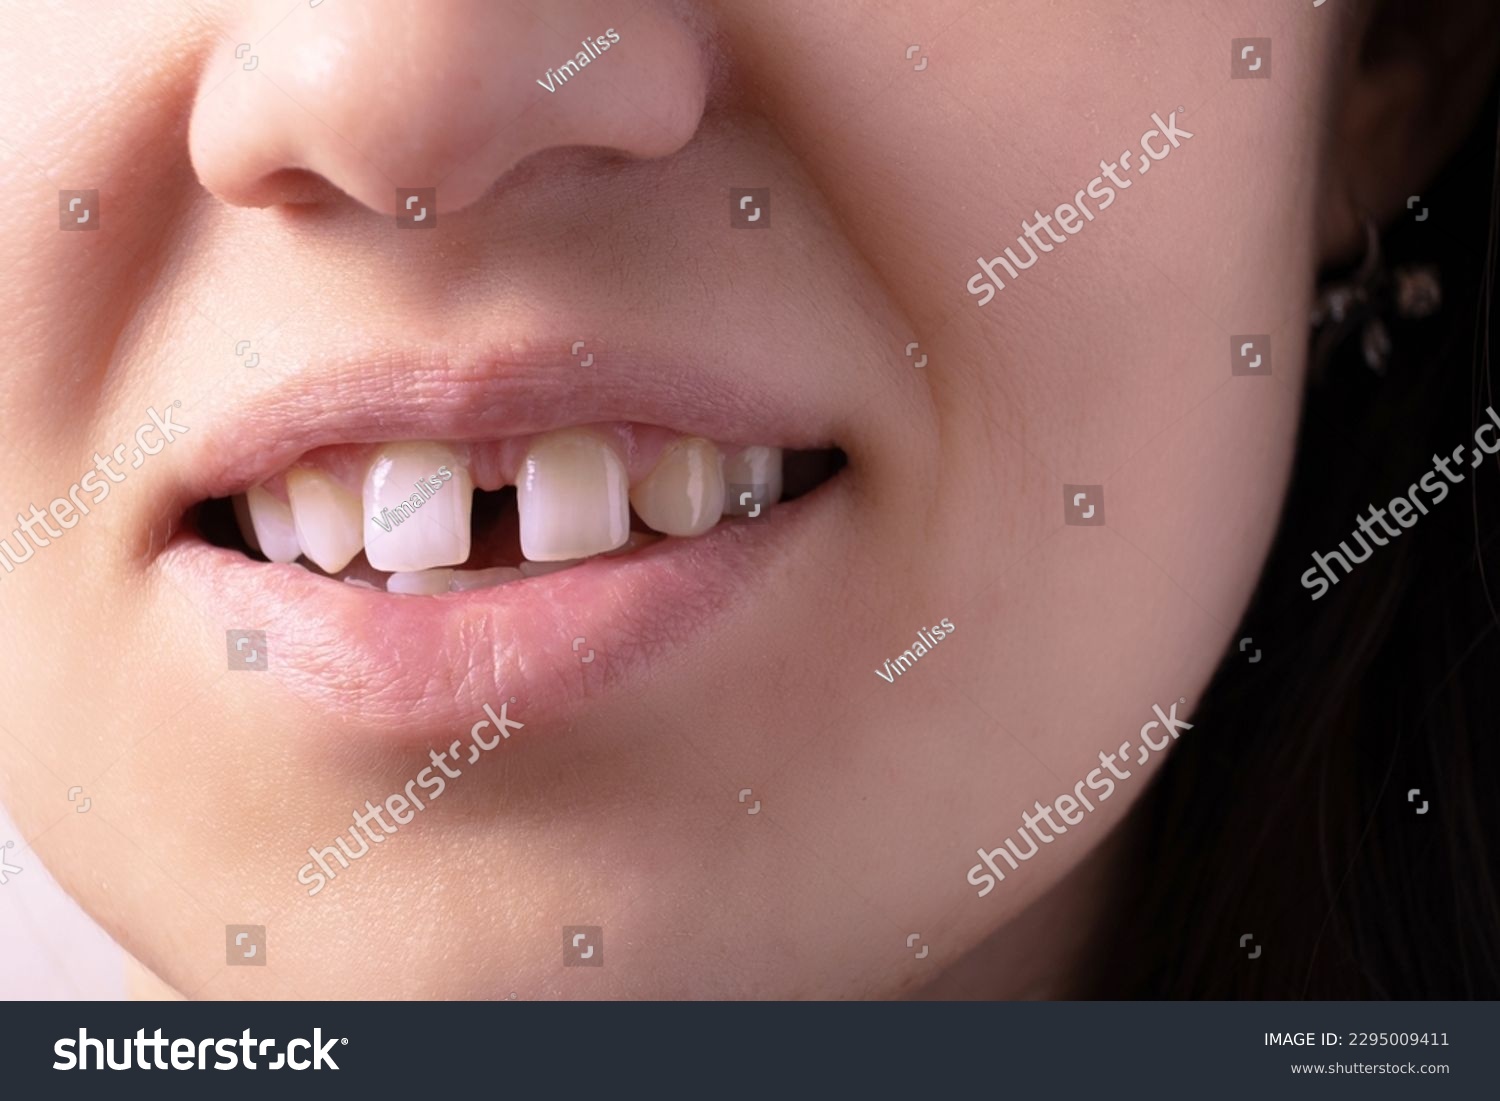 Close up of woman's open smiling mouth with gap teeht. Lips and unusual teeth. #2295009411